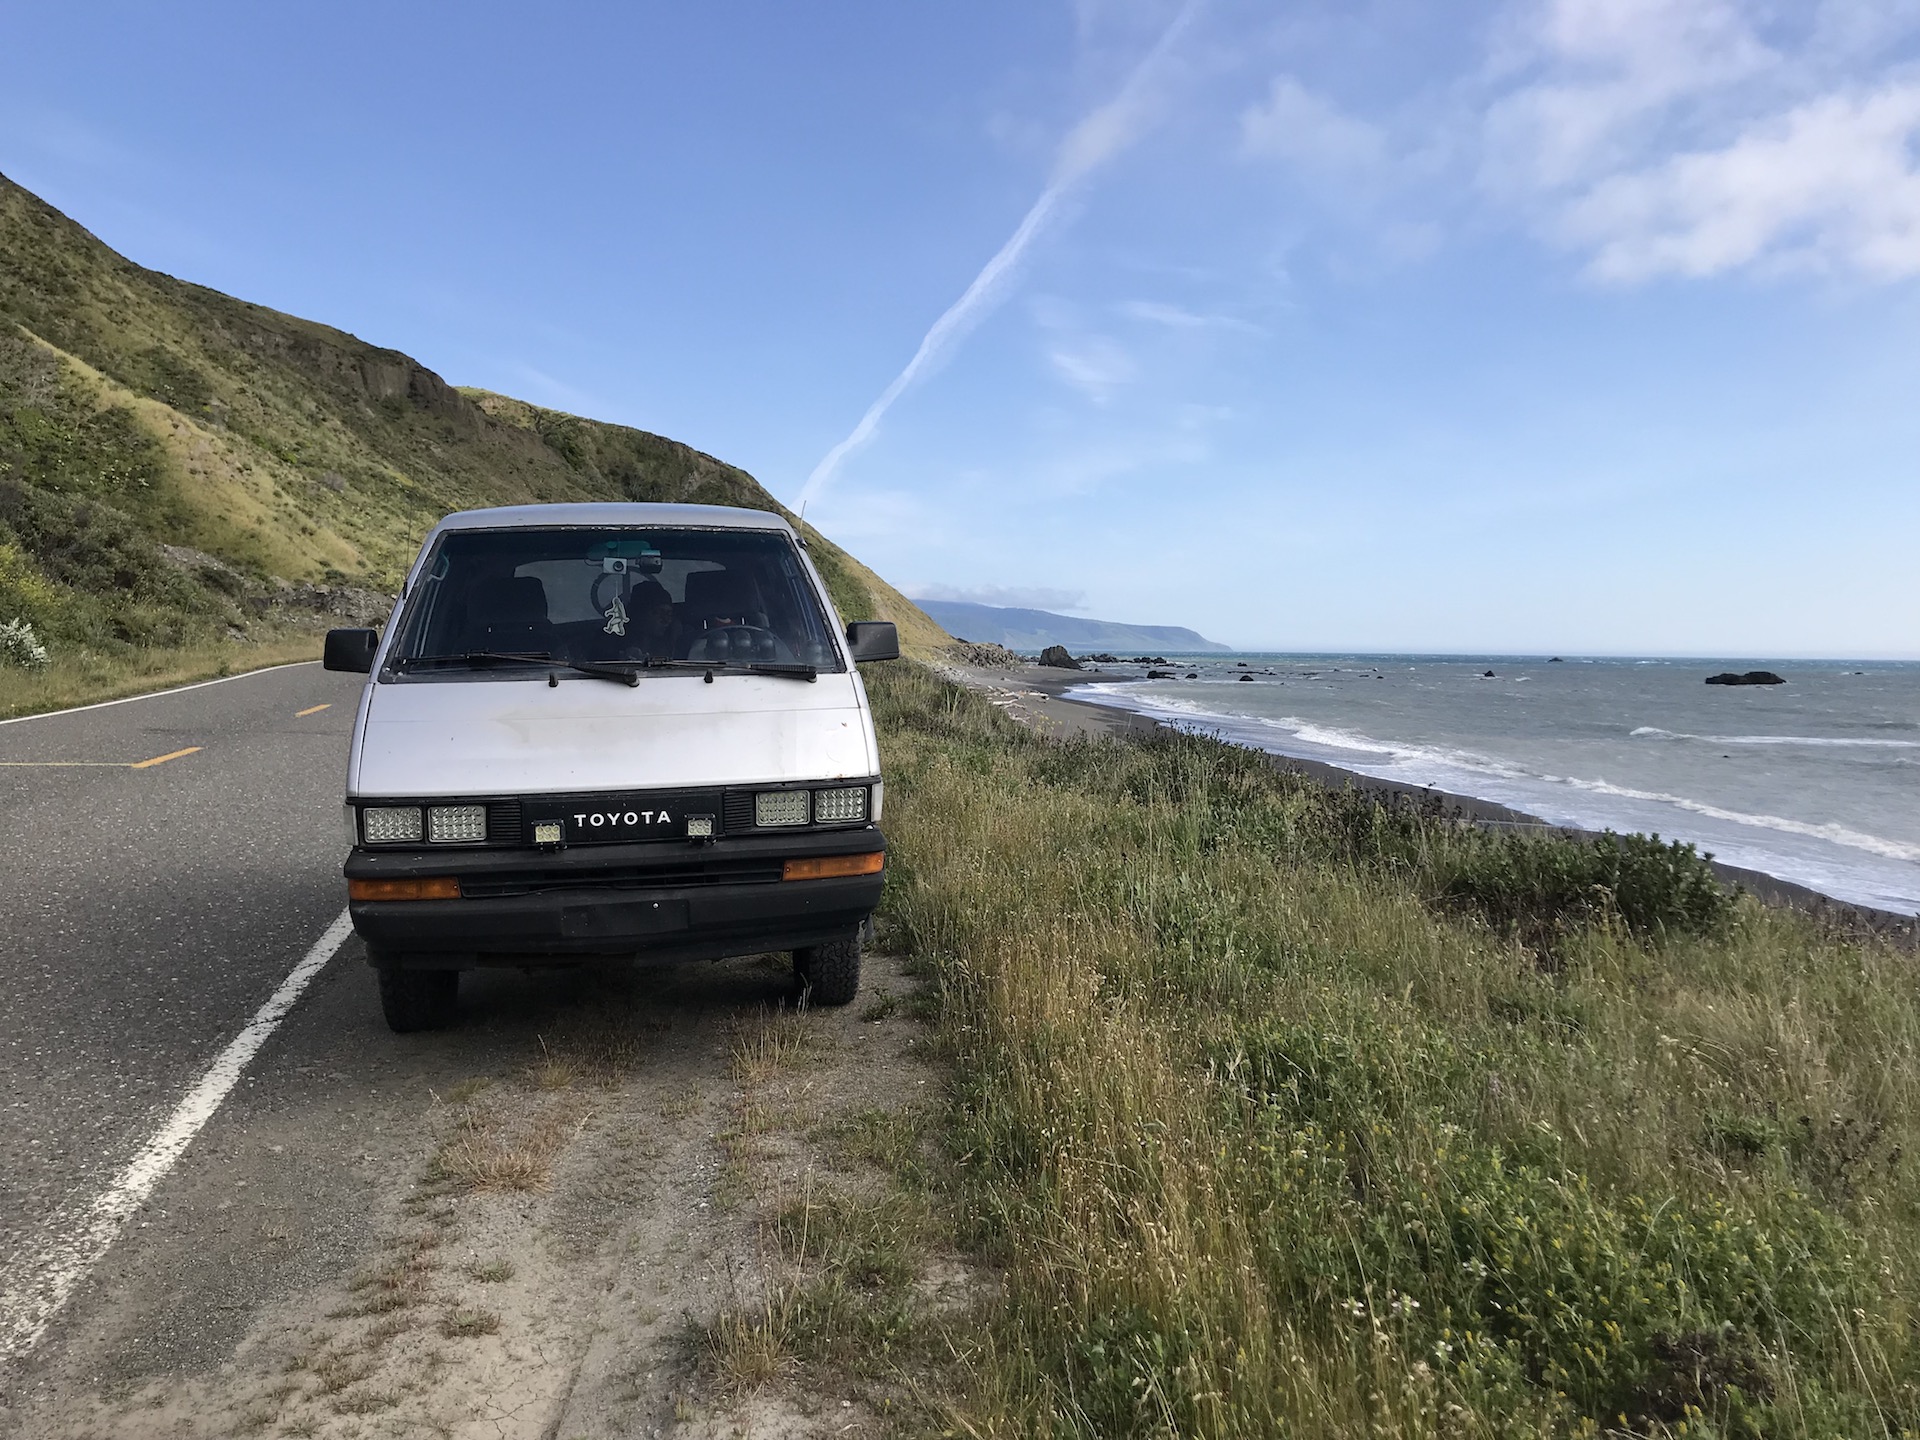 The Lost Coast of highway 1